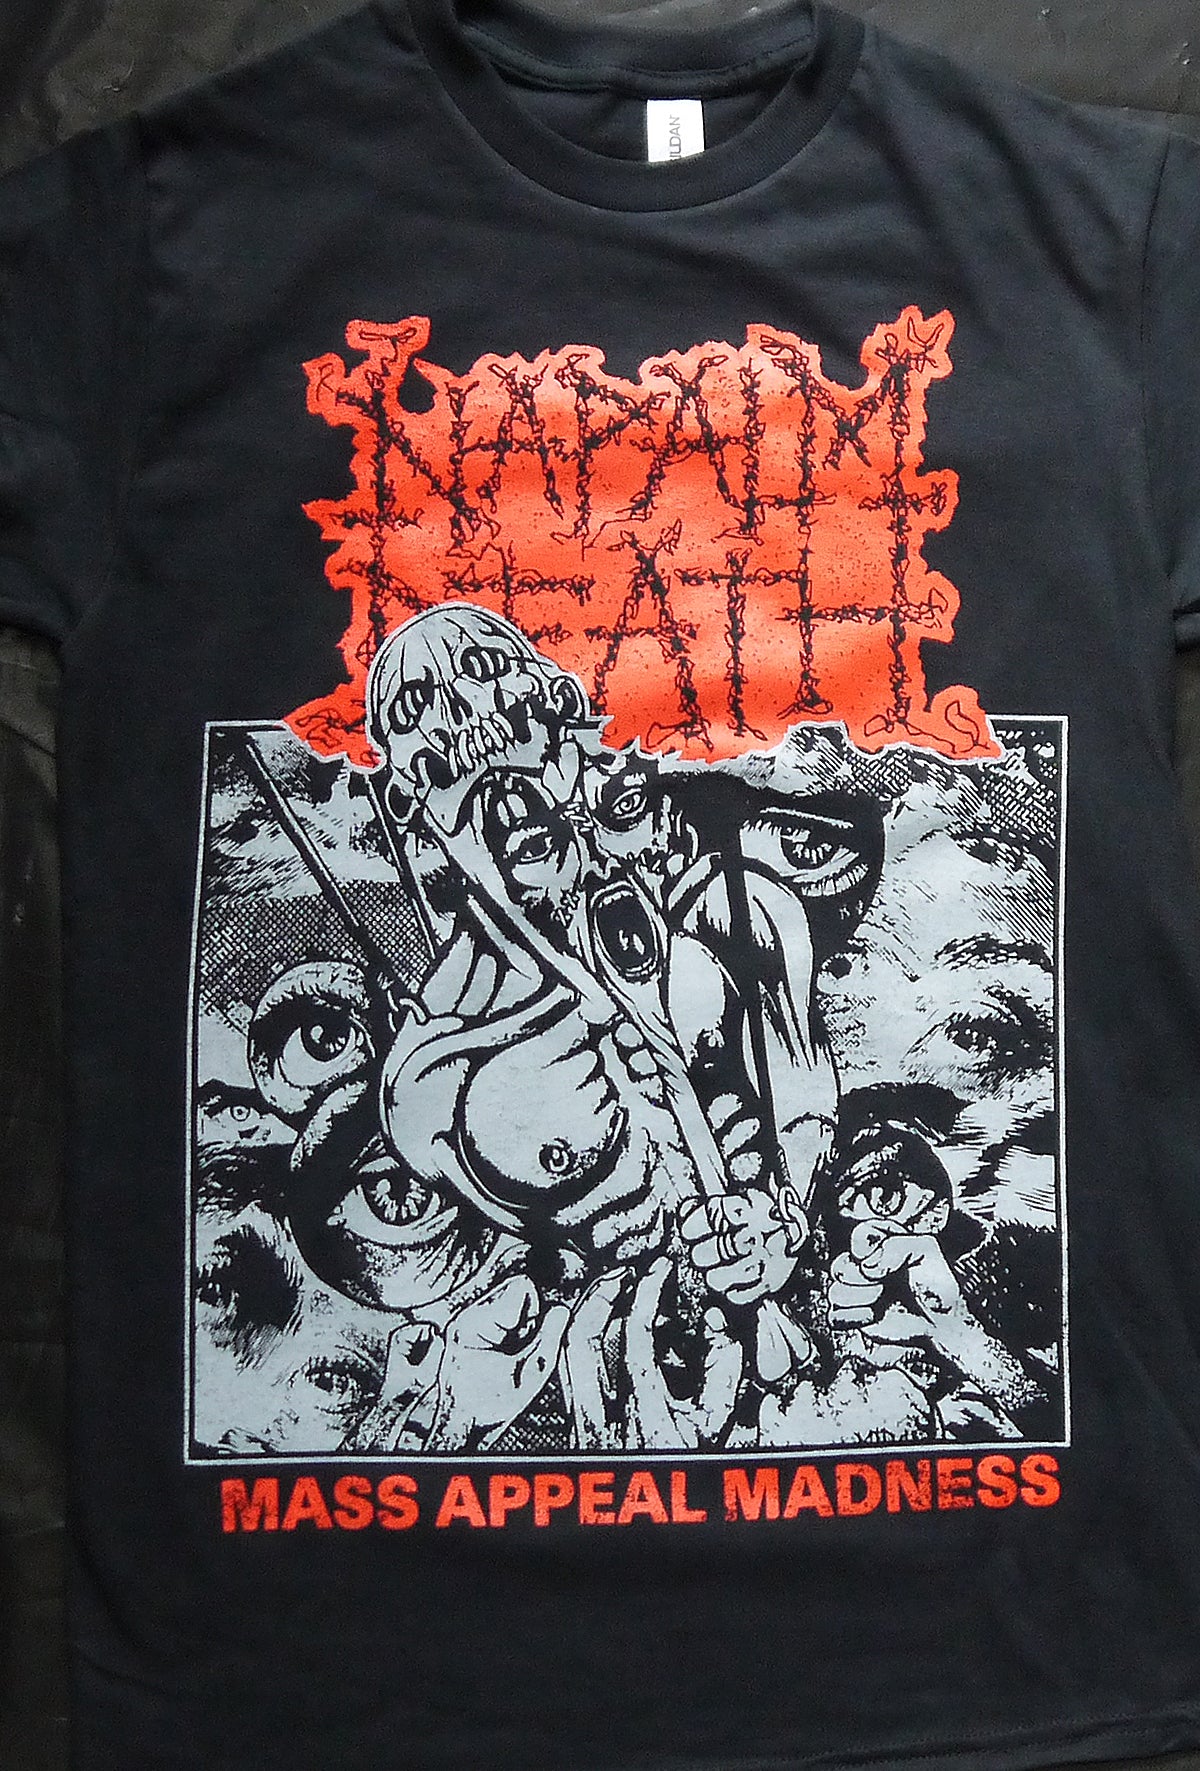 NAPALM DEATH - Mass Appeal Madness T-shirt